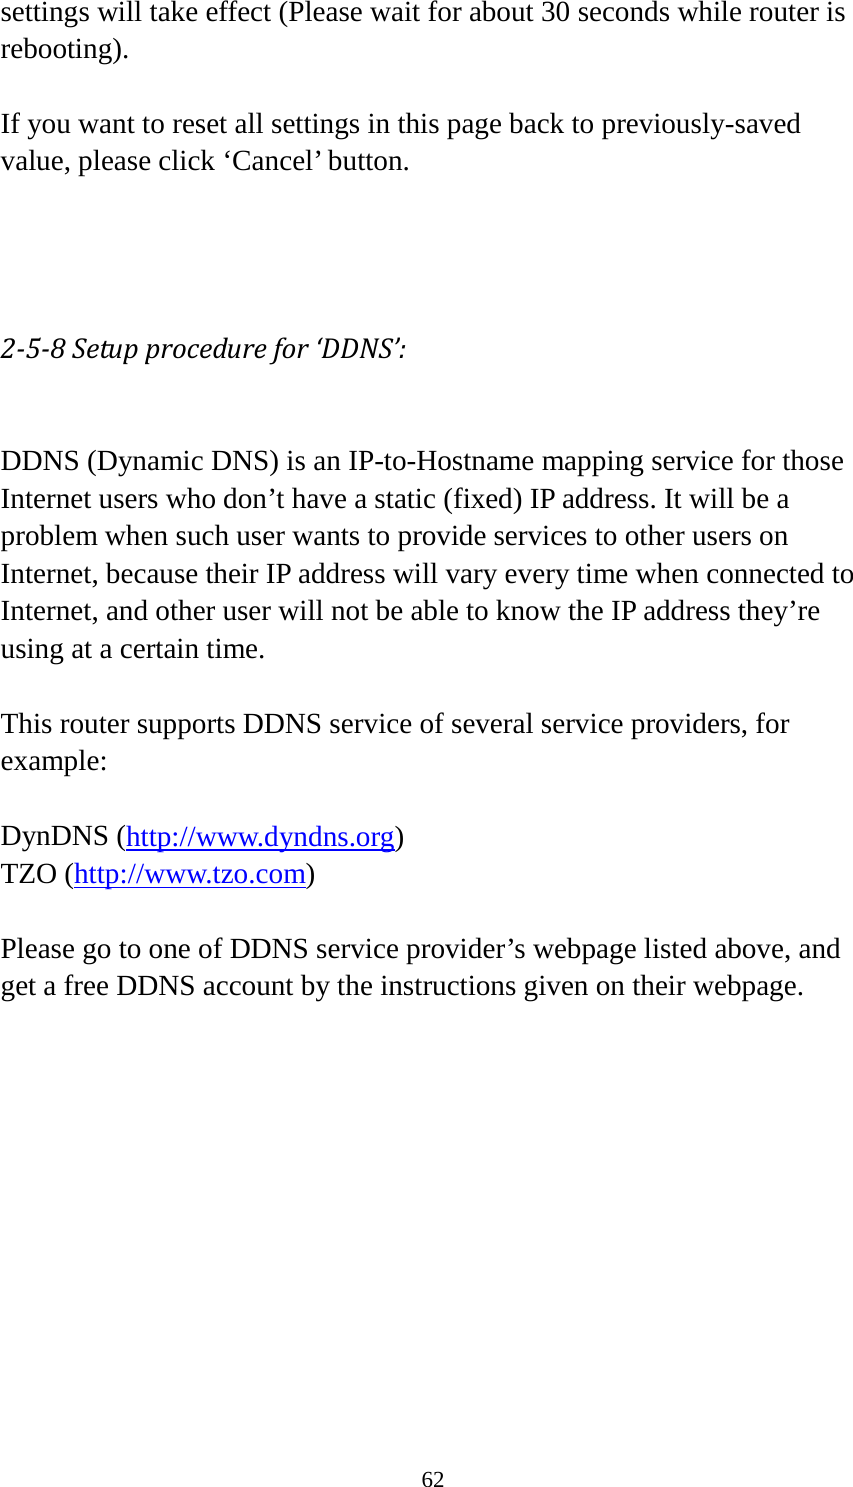 62 settings will take effect (Please wait for about 30 seconds while router is rebooting).  If you want to reset all settings in this page back to previously-saved value, please click ‘Cancel’ button.    2-5-8 Setup procedure for ‘DDNS’:  DDNS (Dynamic DNS) is an IP-to-Hostname mapping service for those Internet users who don’t have a static (fixed) IP address. It will be a problem when such user wants to provide services to other users on Internet, because their IP address will vary every time when connected to Internet, and other user will not be able to know the IP address they’re using at a certain time.  This router supports DDNS service of several service providers, for example:  DynDNS (http://www.dyndns.org) TZO (http://www.tzo.com)  Please go to one of DDNS service provider’s webpage listed above, and get a free DDNS account by the instructions given on their webpage.  